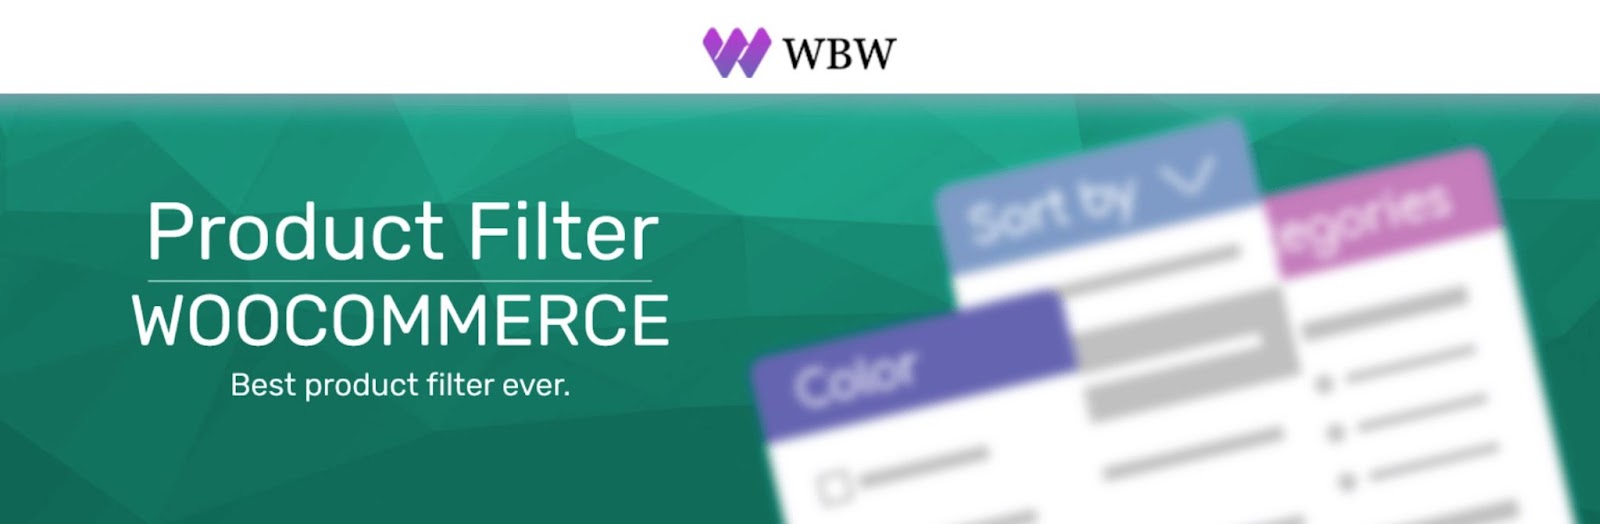 WordPress filter plugin, example from Product Filter by WBW